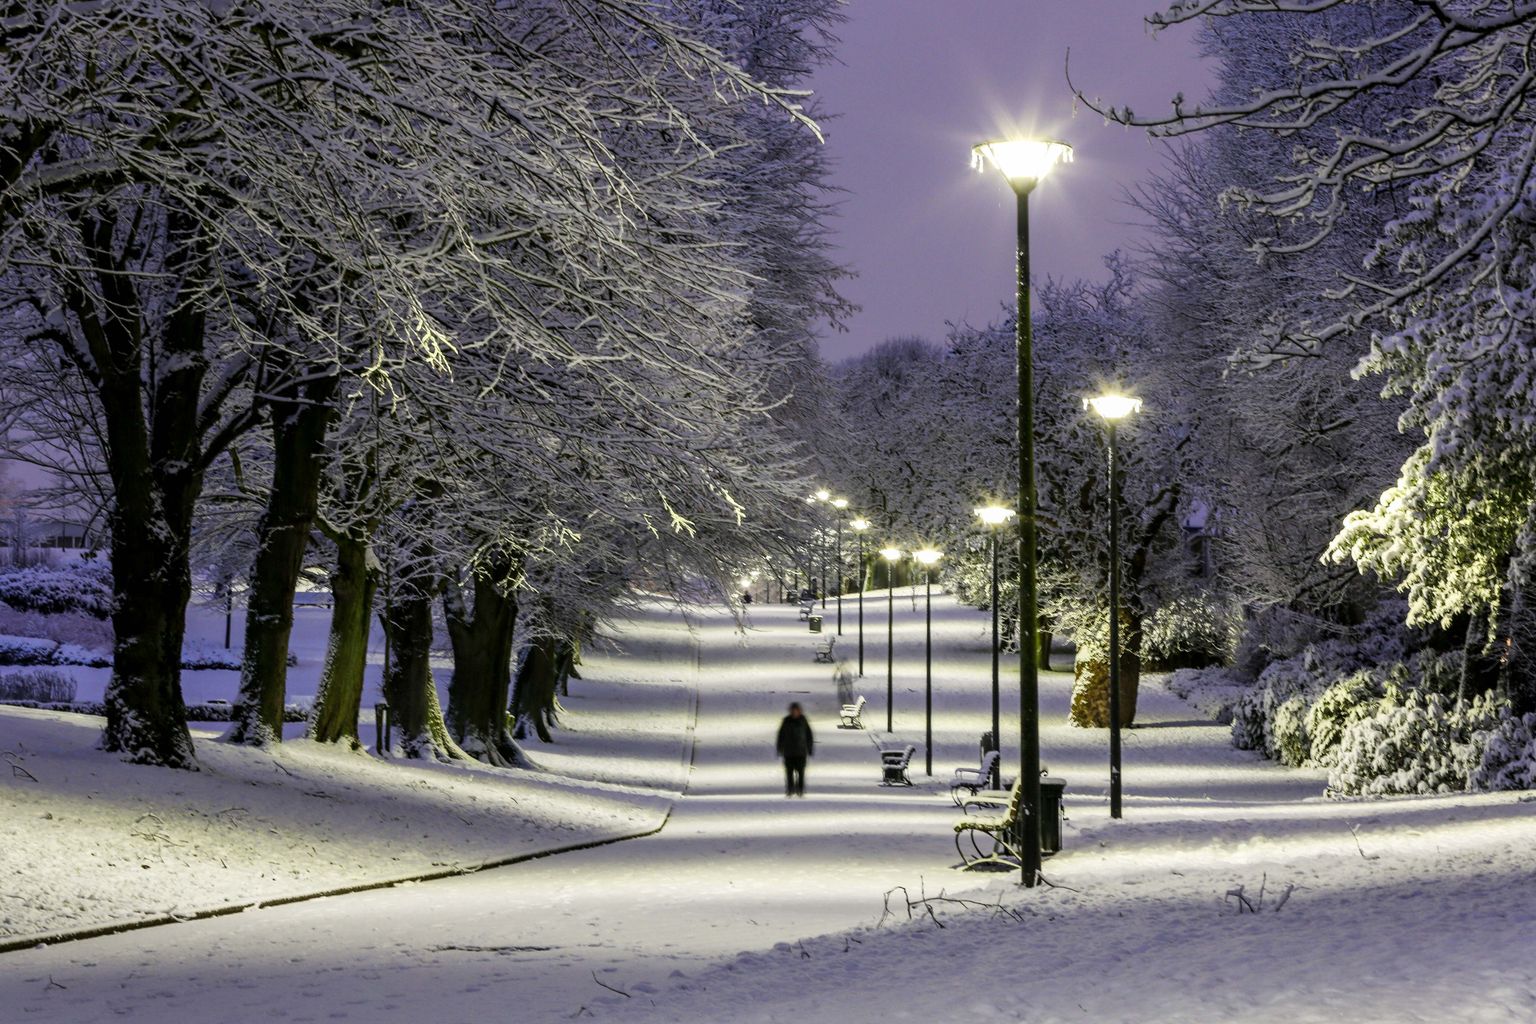 heavy snow possible in northern ireland as cold snap hits